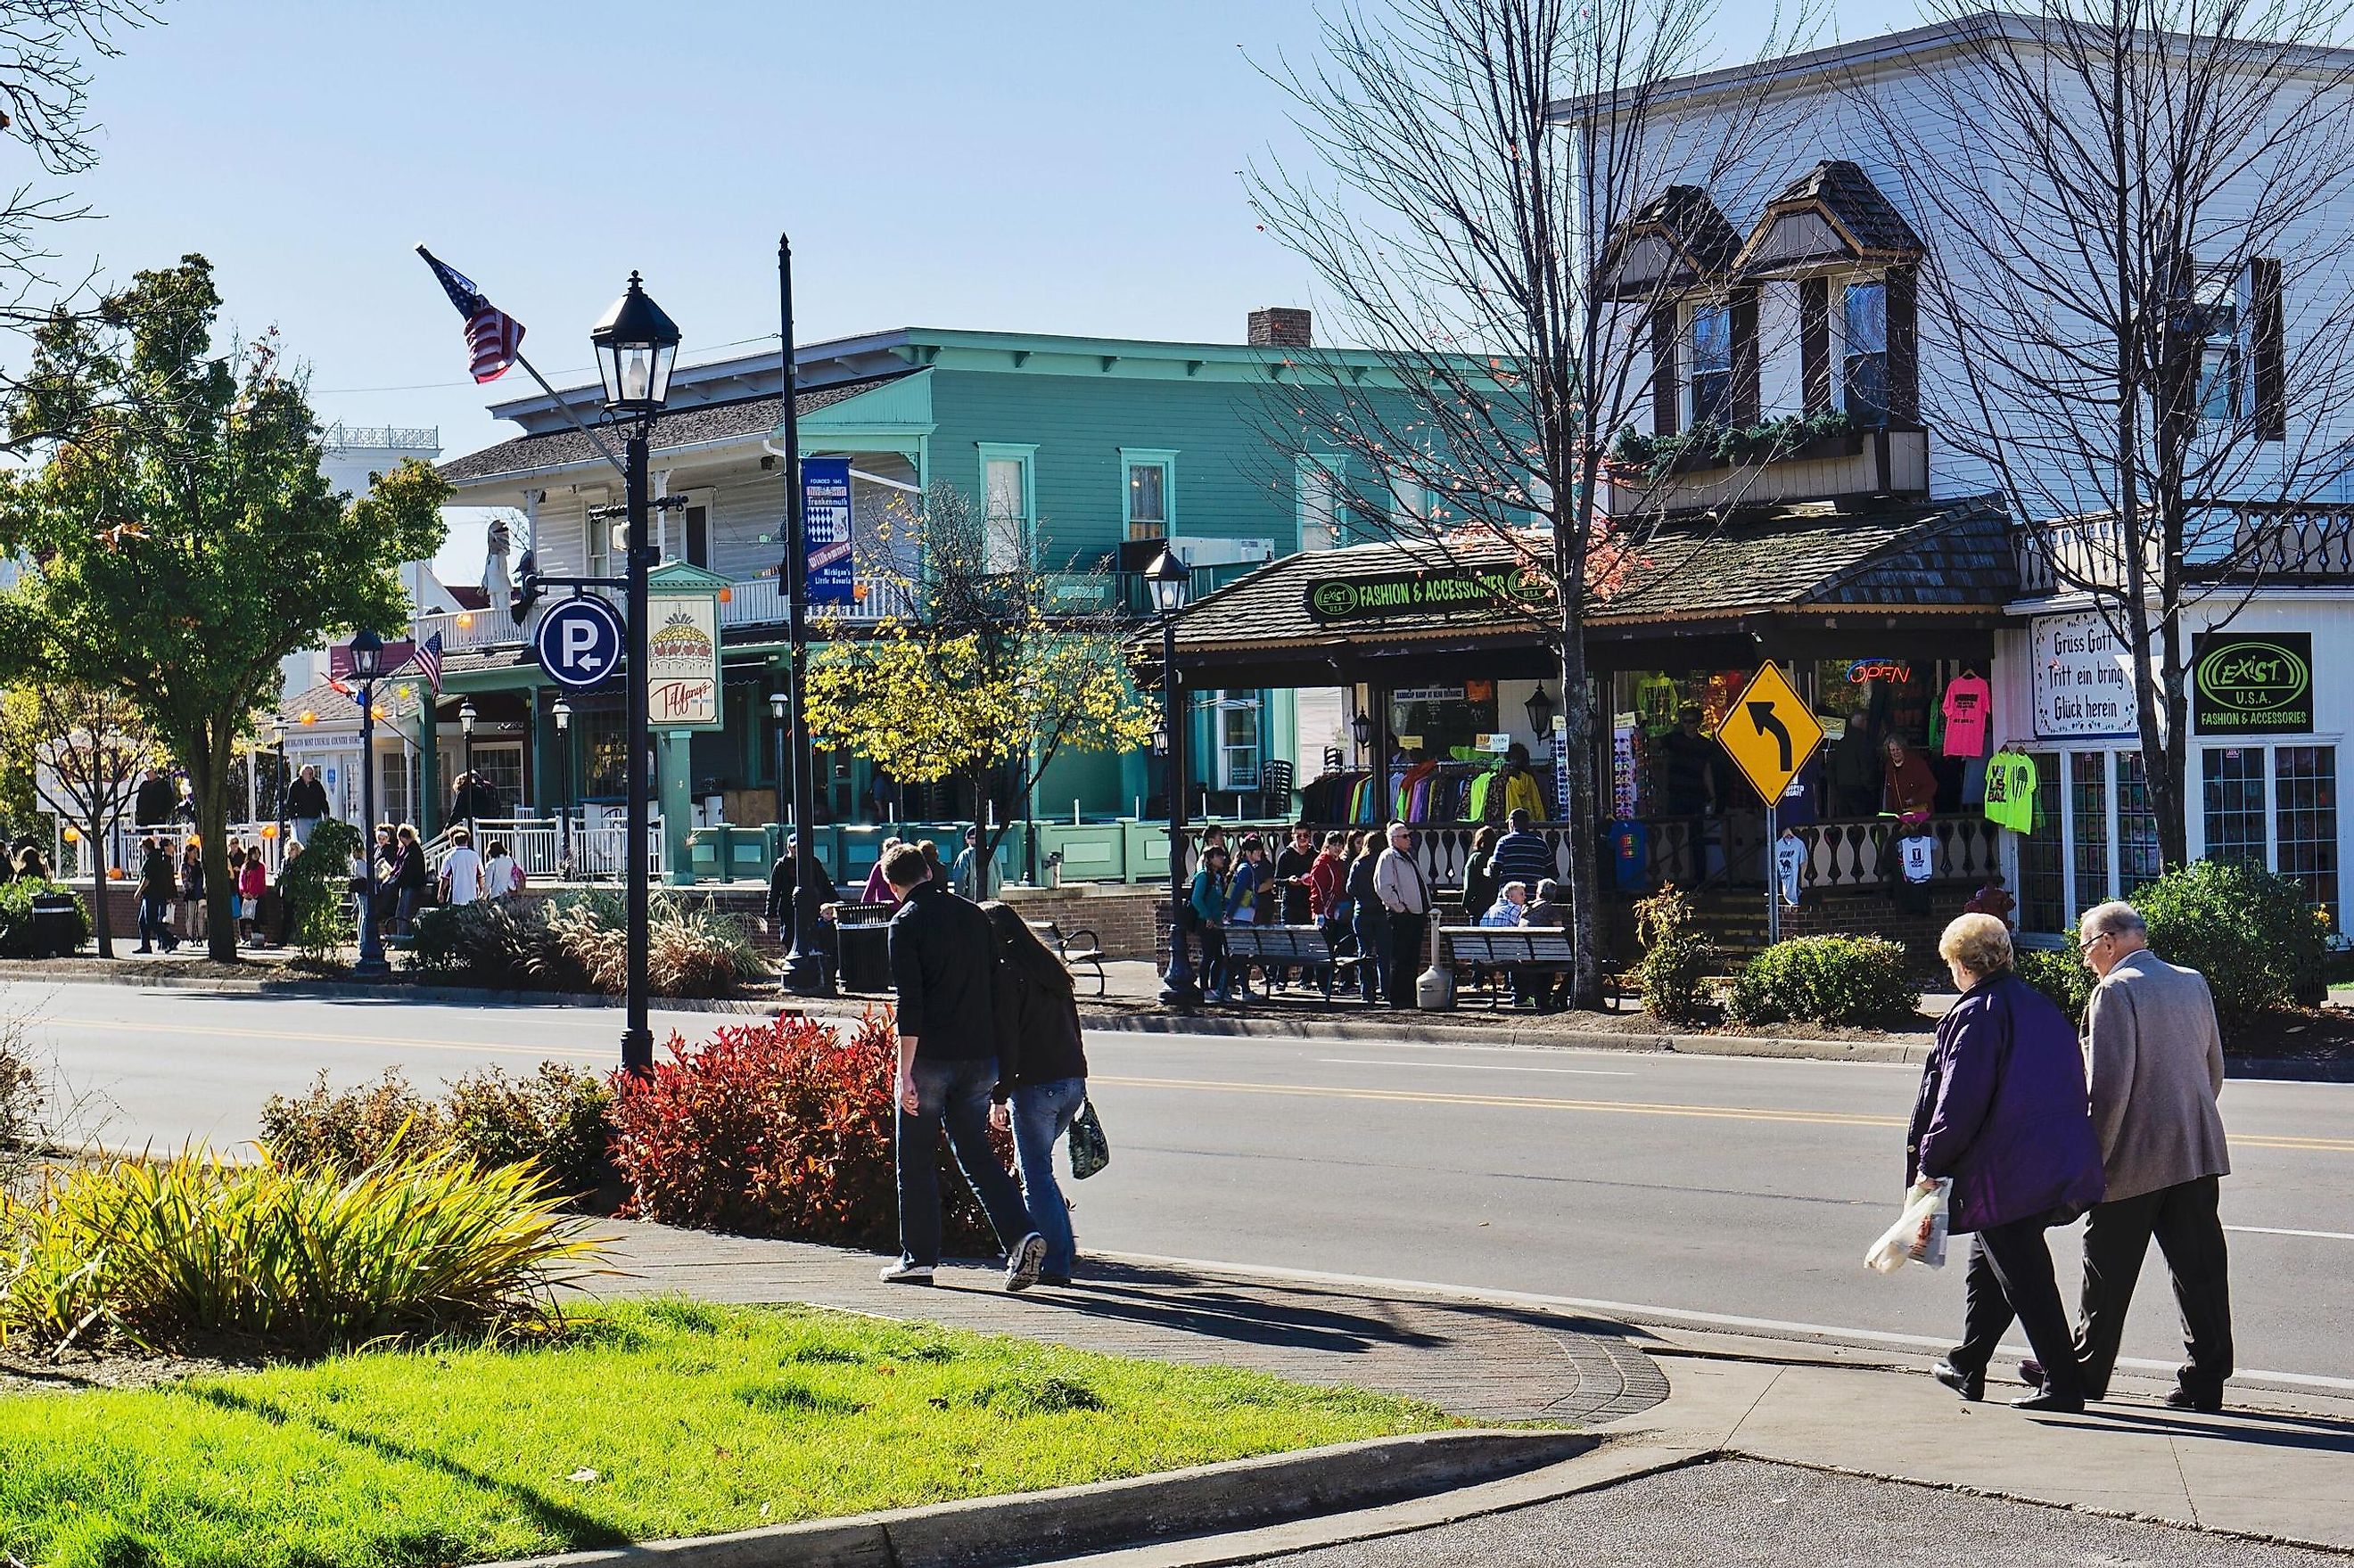 street view in Frankenmuth, Michigan via RiverNorthPhotography on iStock.com